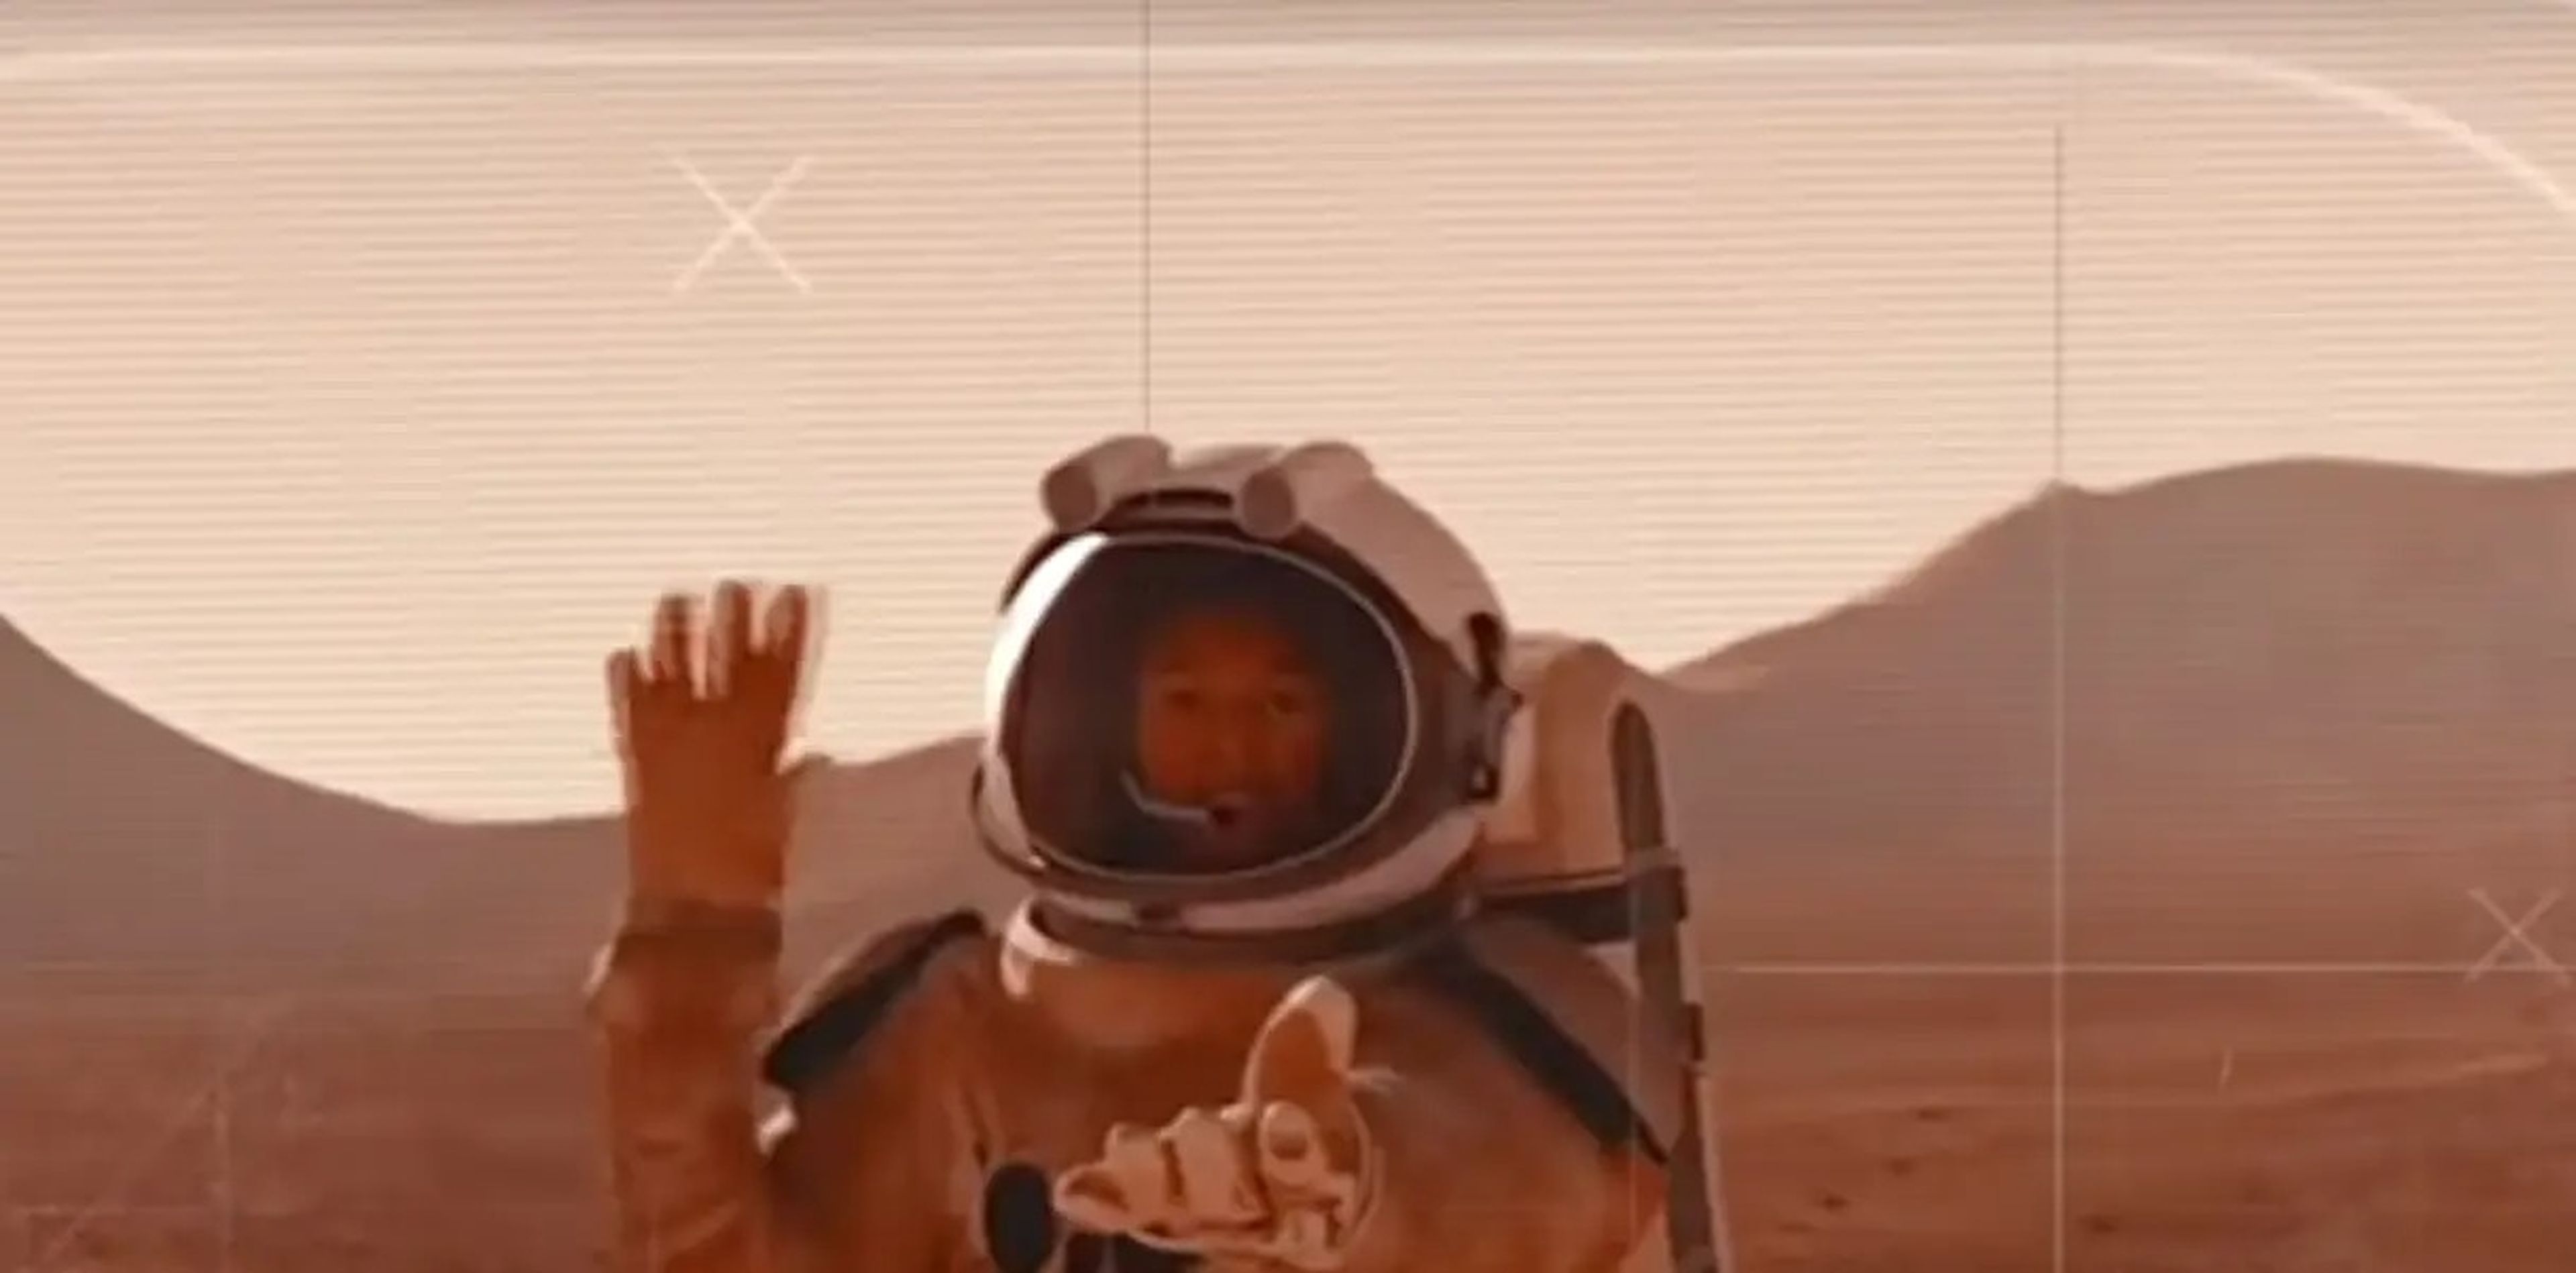 A picture of an astronaut broadcasting from Mars.